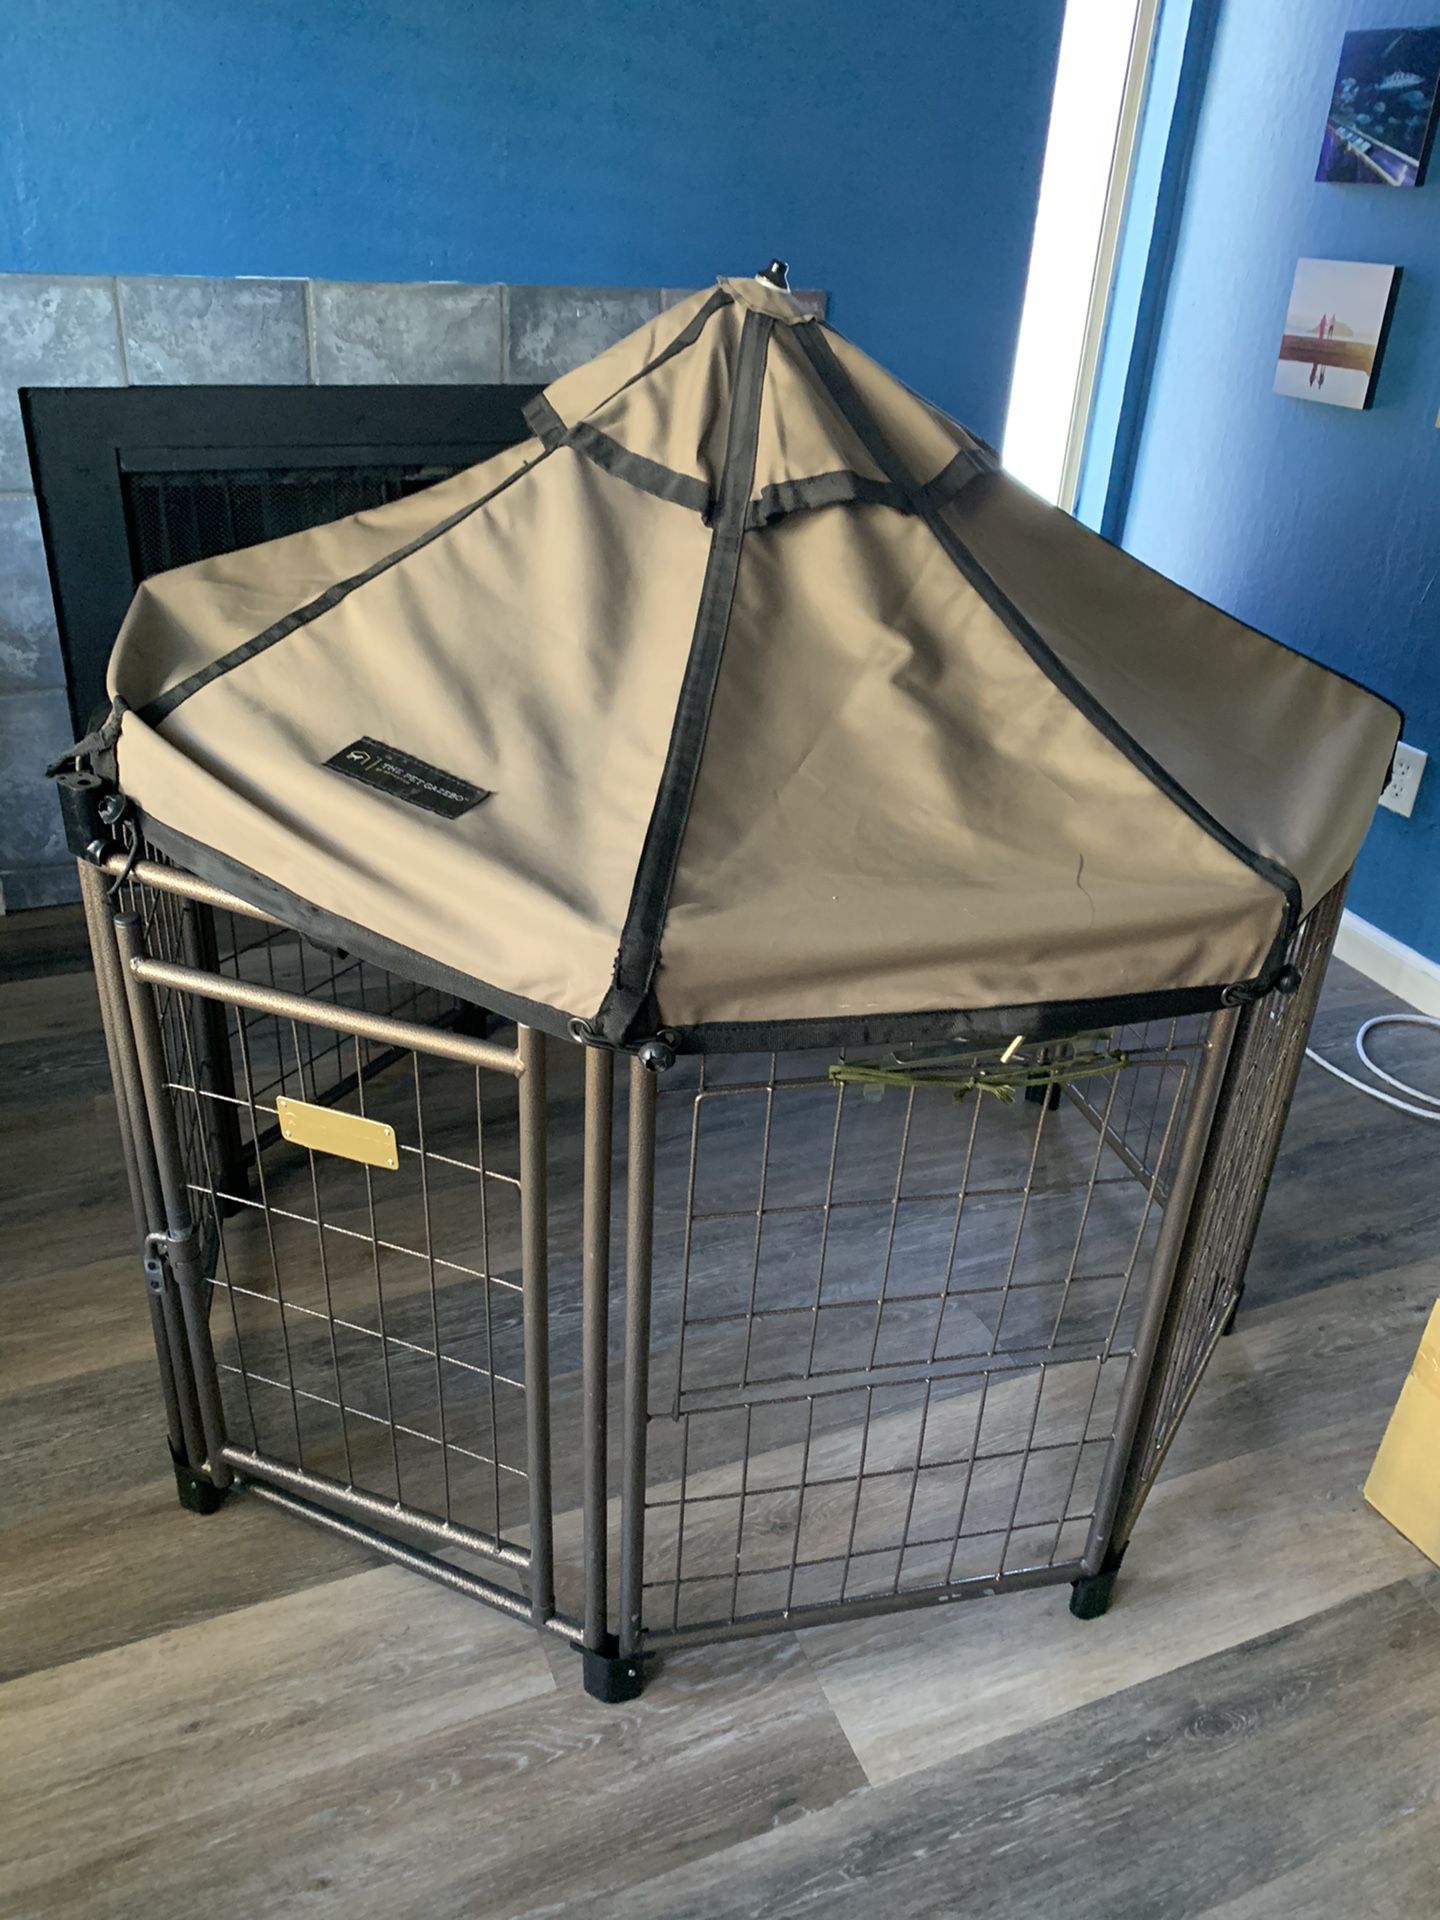 Dog crate and accessories (toys, treats)